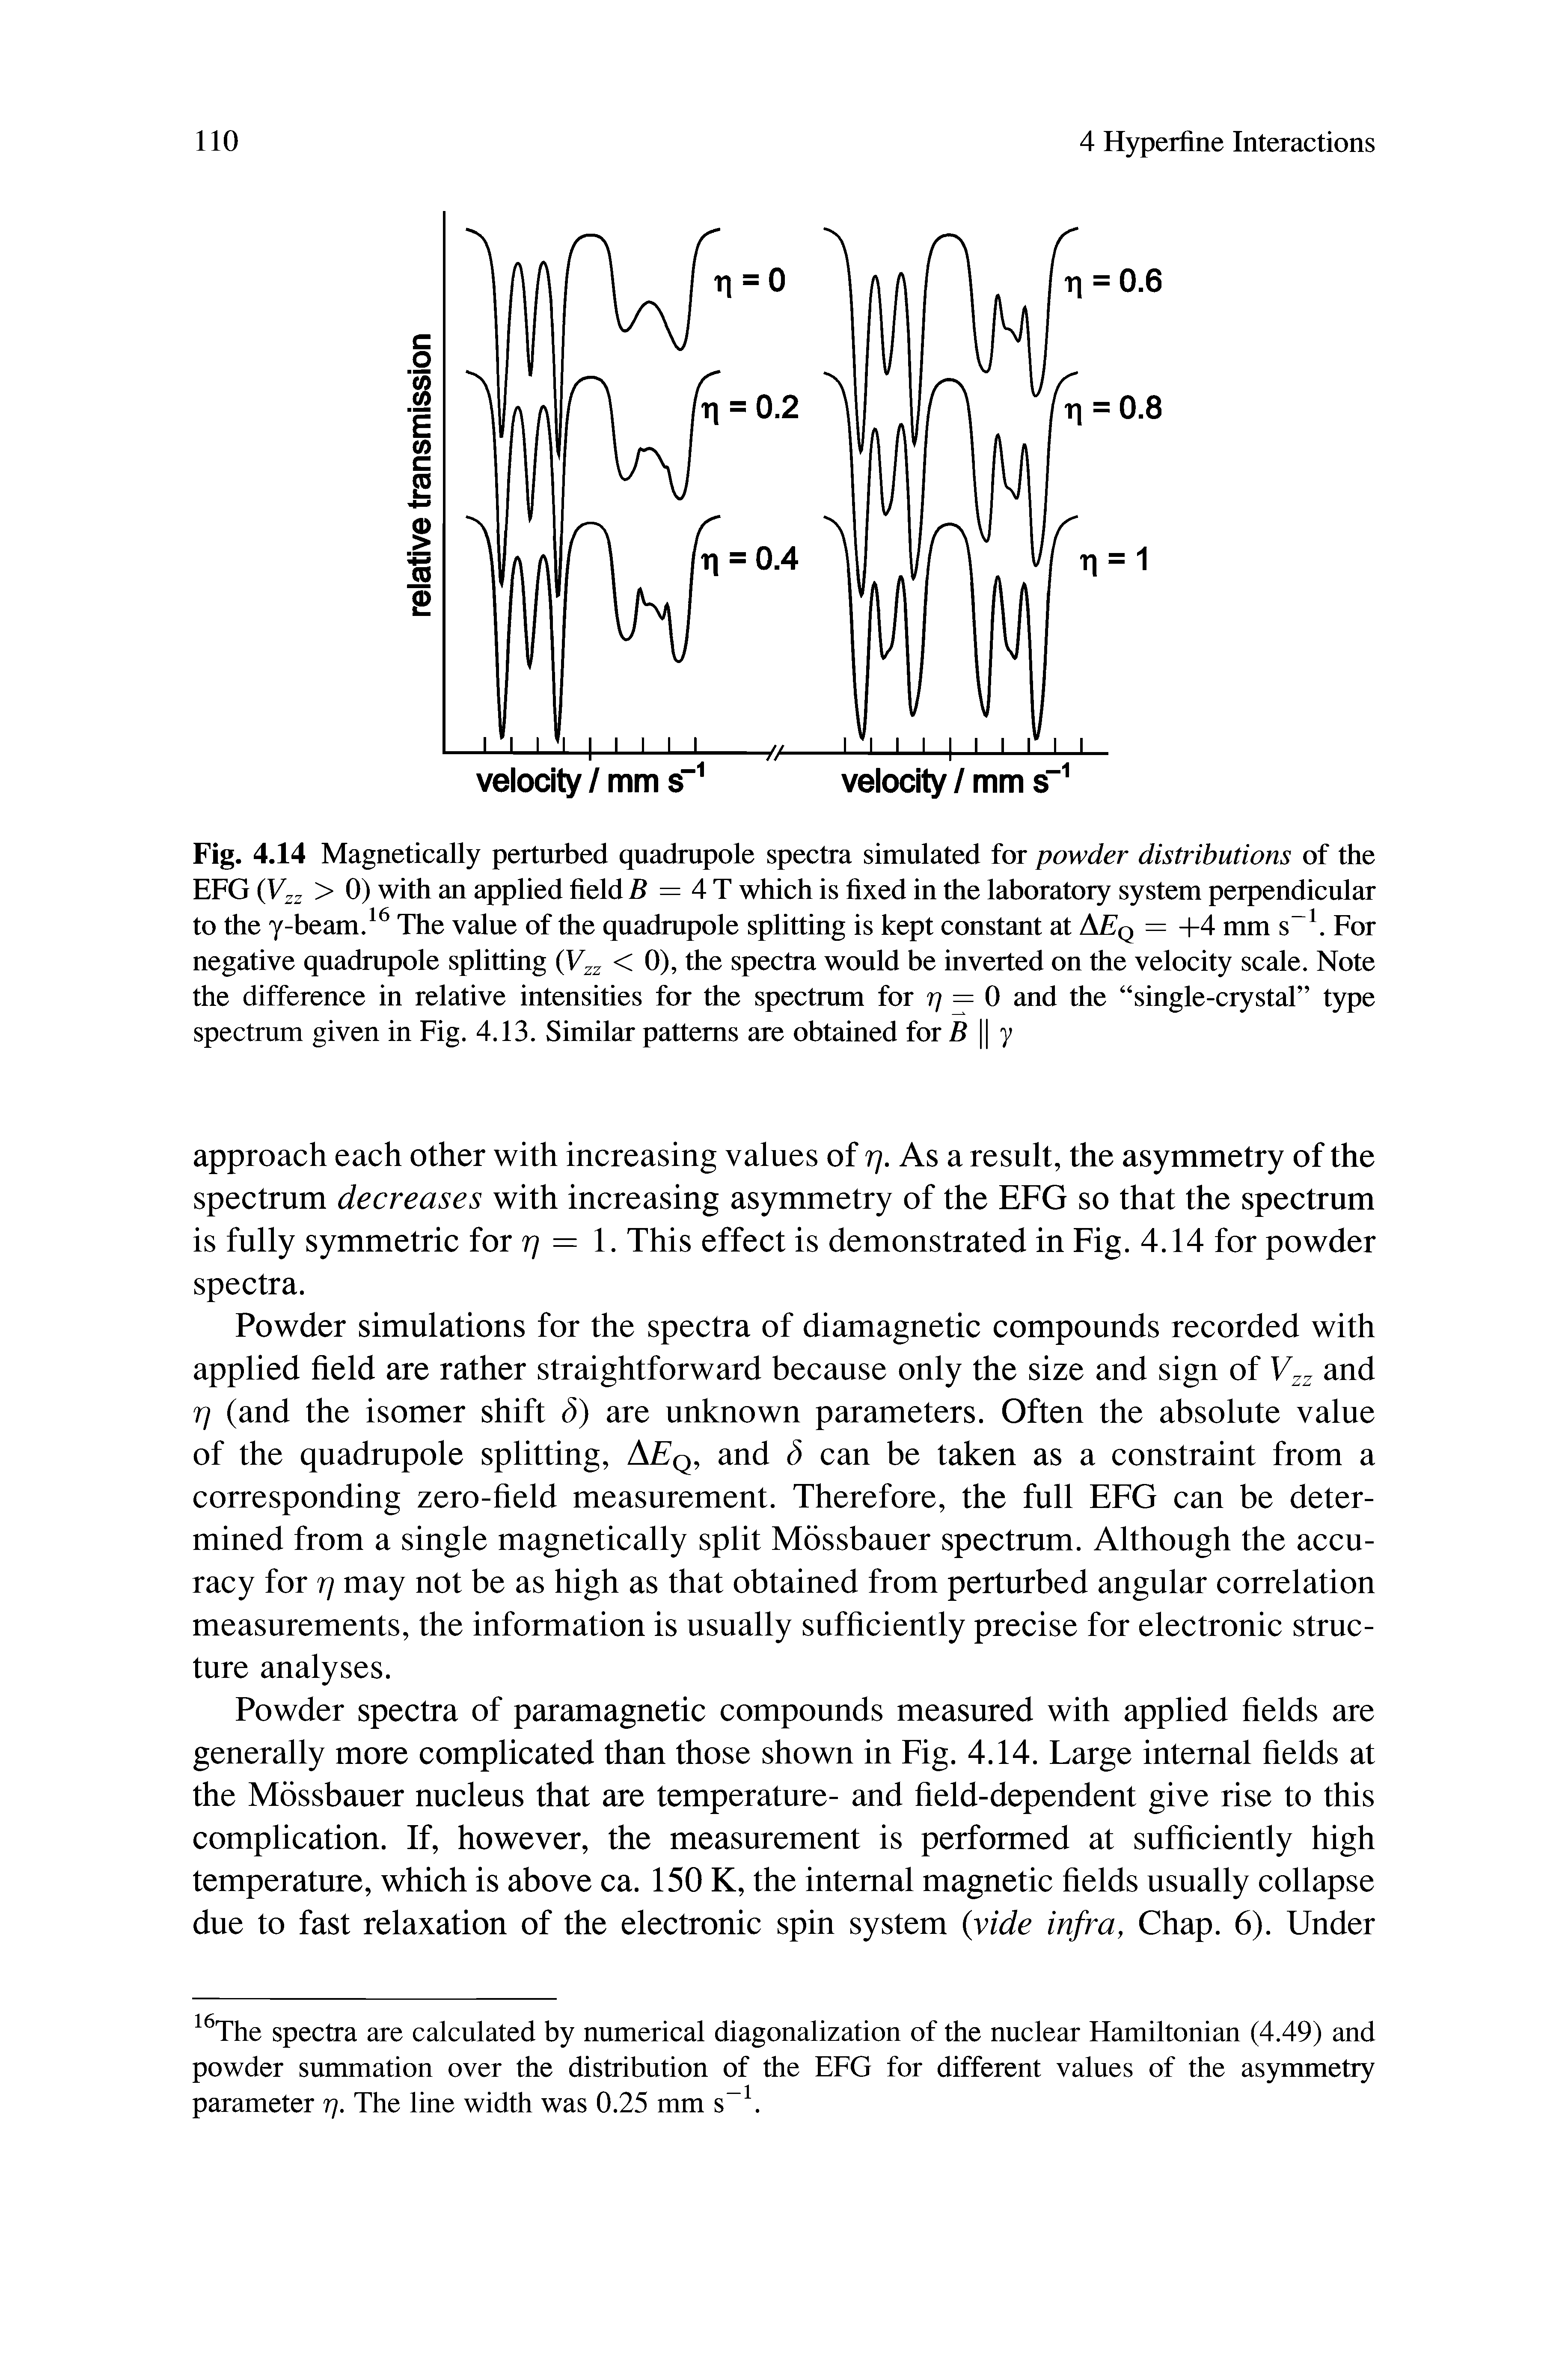 Fig. 4.14 Magnetically perturbed quadrupole spectra simulated for powder distributions of the EFG (Vzz > 0) with an applied field B = 4T which is fixed in the laboratory system perpendicular to the y-beam/ The value of the quadrupole splitting is kept constant at AEq = +4 mm s For negative quadrupole splitting (V z < 0), the spectra would be inverted on the velocity scale. Note the difference in relative intensities for the spectrum for ry = 0 and the single-crystal type spectrum given in Fig. 4.13. Similar patterns are obtained for B y...